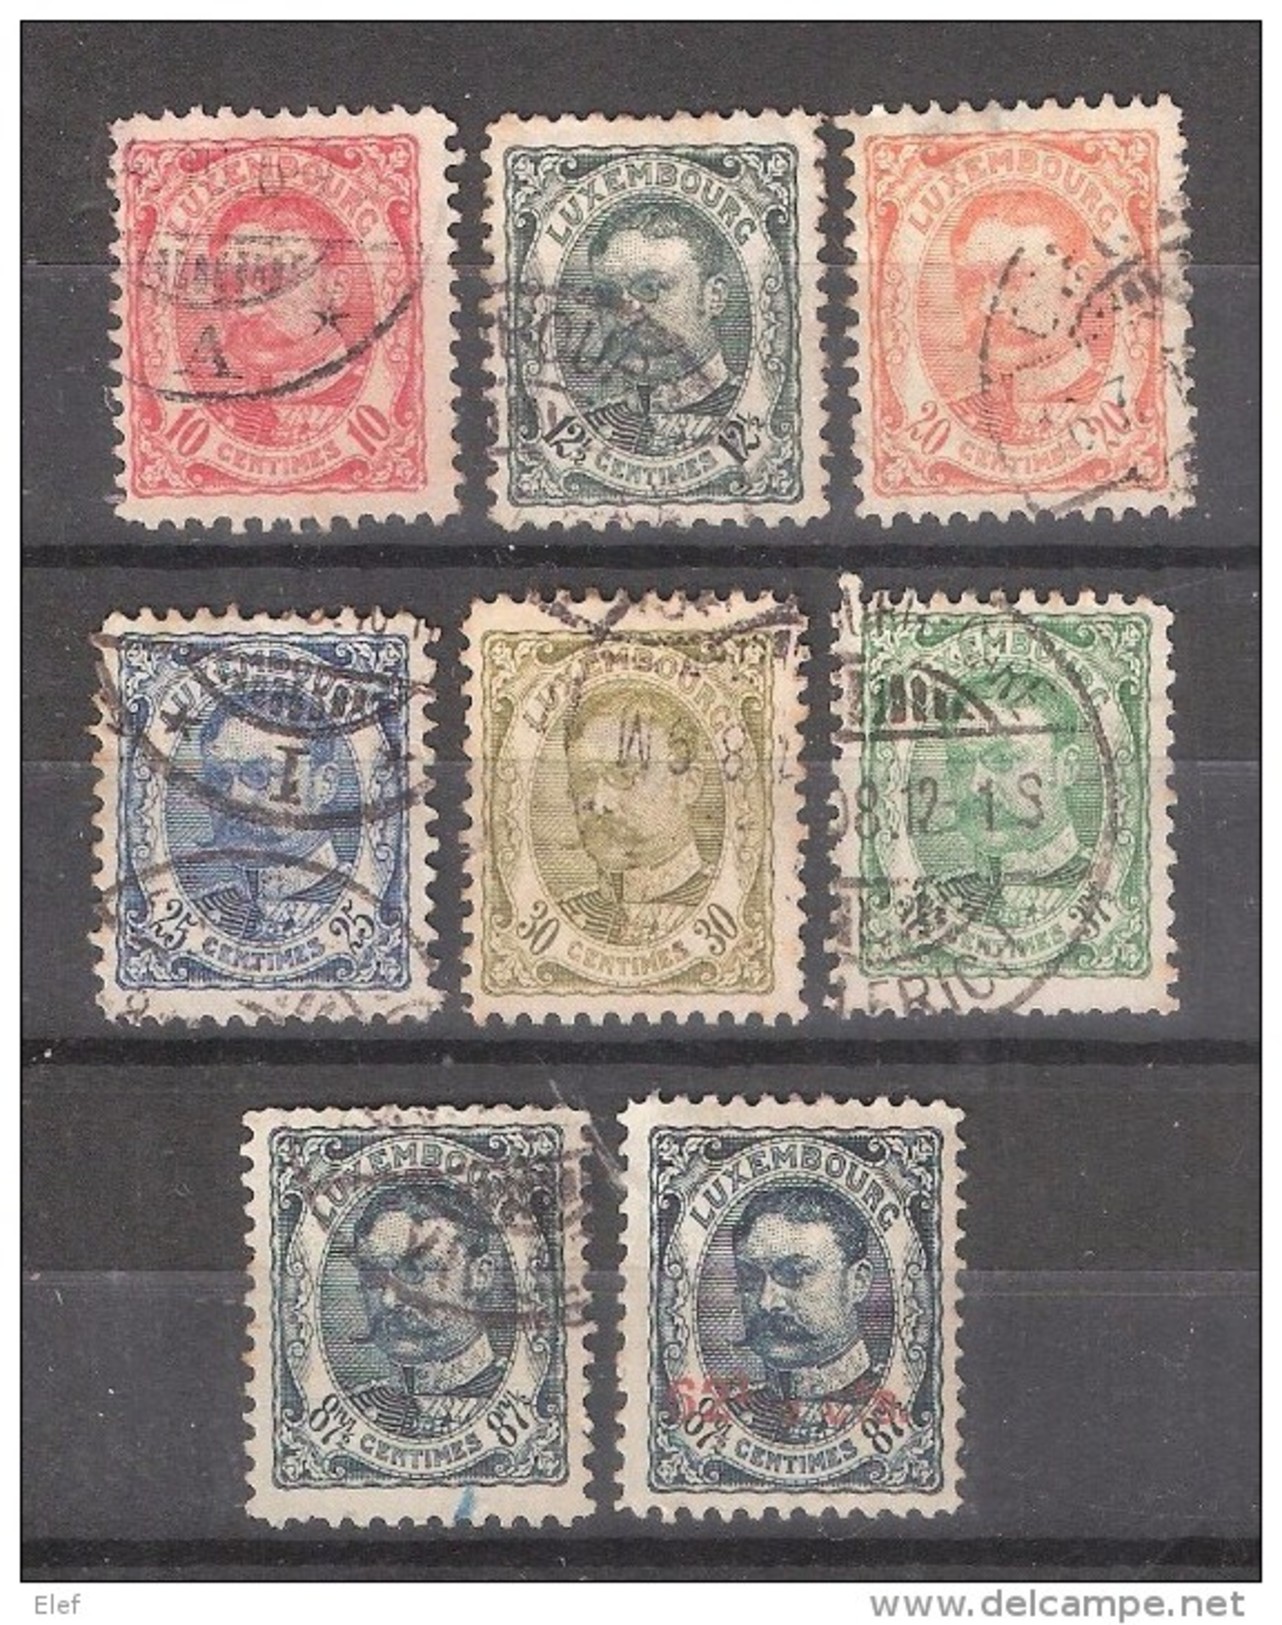 LUXEMBOURG,1906, Guillaume IV , Lot Timbres  N° Yvert 74 / 75 + 77 / 80 , 82  Obl + N° 86 Neuf * , TB, Cote 19 Euros - 1906 William IV